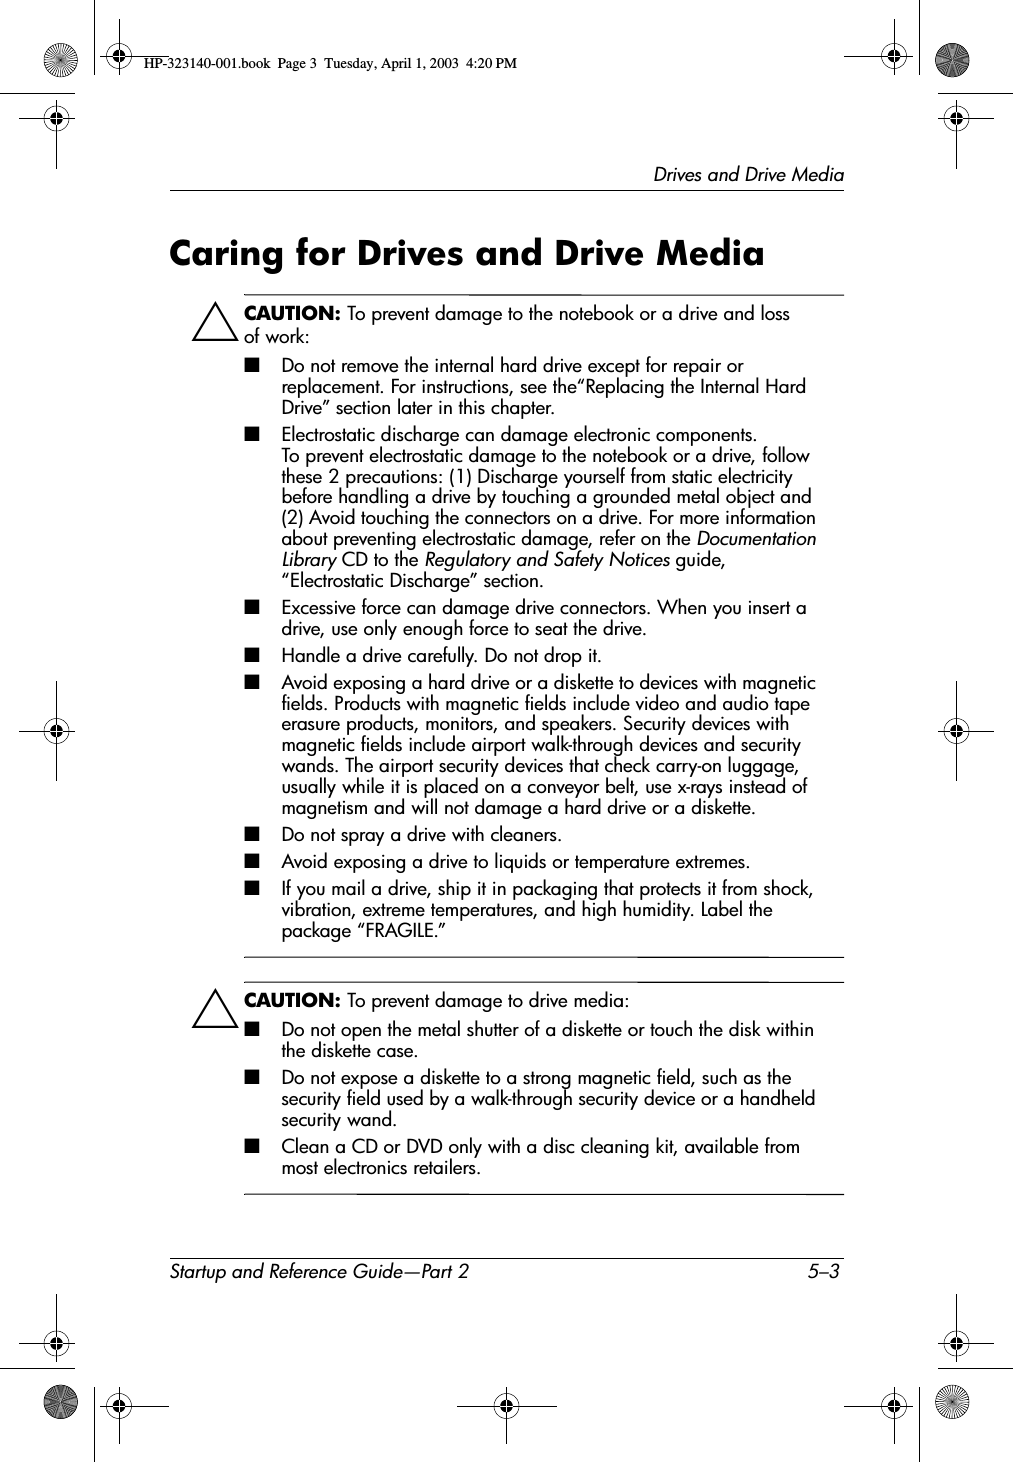 Drives and Drive MediaStartup and Reference Guide—Part 2 5–3Caring for Drives and Drive MediaÄCAUTION: To prevent damage to the notebook or a drive and loss of work:■Do not remove the internal hard drive except for repair or replacement. For instructions, see the“Replacing the Internal Hard Drive” section later in this chapter.■Electrostatic discharge can damage electronic components. To prevent electrostatic damage to the notebook or a drive, follow these 2 precautions: (1) Discharge yourself from static electricity before handling a drive by touching a grounded metal object and (2) Avoid touching the connectors on a drive. For more information about preventing electrostatic damage, refer on the Documentation Library CD to the Regulatory and Safety Notices guide, “Electrostatic Discharge” section.■Excessive force can damage drive connectors. When you insert a drive, use only enough force to seat the drive.■Handle a drive carefully. Do not drop it.■Avoid exposing a hard drive or a diskette to devices with magnetic fields. Products with magnetic fields include video and audio tape erasure products, monitors, and speakers. Security devices with magnetic fields include airport walk-through devices and security wands. The airport security devices that check carry-on luggage, usually while it is placed on a conveyor belt, use x-rays instead of magnetism and will not damage a hard drive or a diskette.■Do not spray a drive with cleaners.■Avoid exposing a drive to liquids or temperature extremes.■If you mail a drive, ship it in packaging that protects it from shock, vibration, extreme temperatures, and high humidity. Label the package “FRAGILE.”ÄCAUTION: To prevent damage to drive media:■Do not open the metal shutter of a diskette or touch the disk within the diskette case.■Do not expose a diskette to a strong magnetic field, such as the security field used by a walk-through security device or a handheld security wand.■Clean a CD or DVD only with a disc cleaning kit, available from most electronics retailers.HP-323140-001.book  Page 3  Tuesday, April 1, 2003  4:20 PM